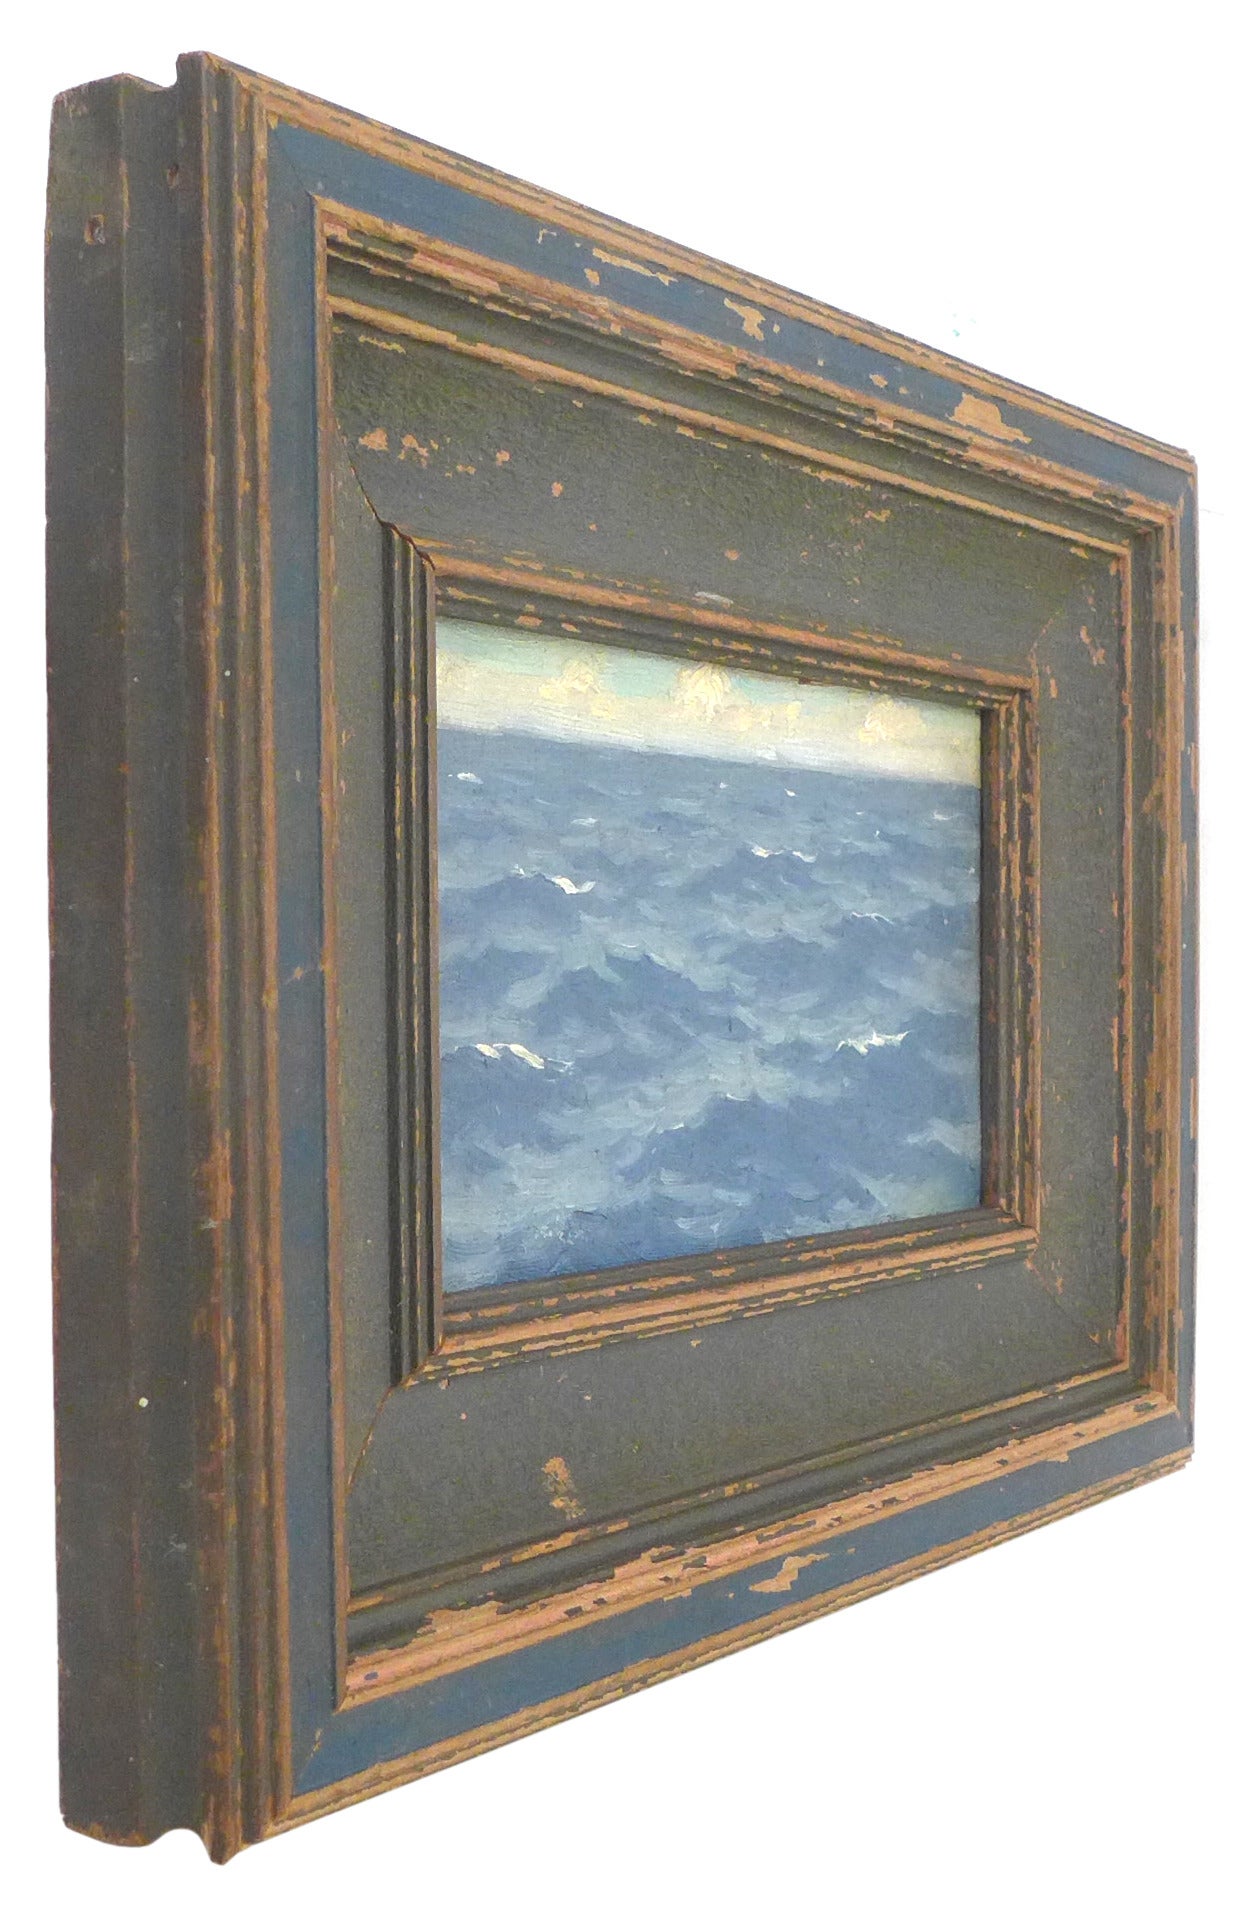 A wonderful, small painting of the sea by J. Mason Reeves.  A beautifully executed, perfectly tiny window overlooking an endless ocean seemingly from the middle of it.  Small, rolling and occasionally cresting waves lulling and extending out to a